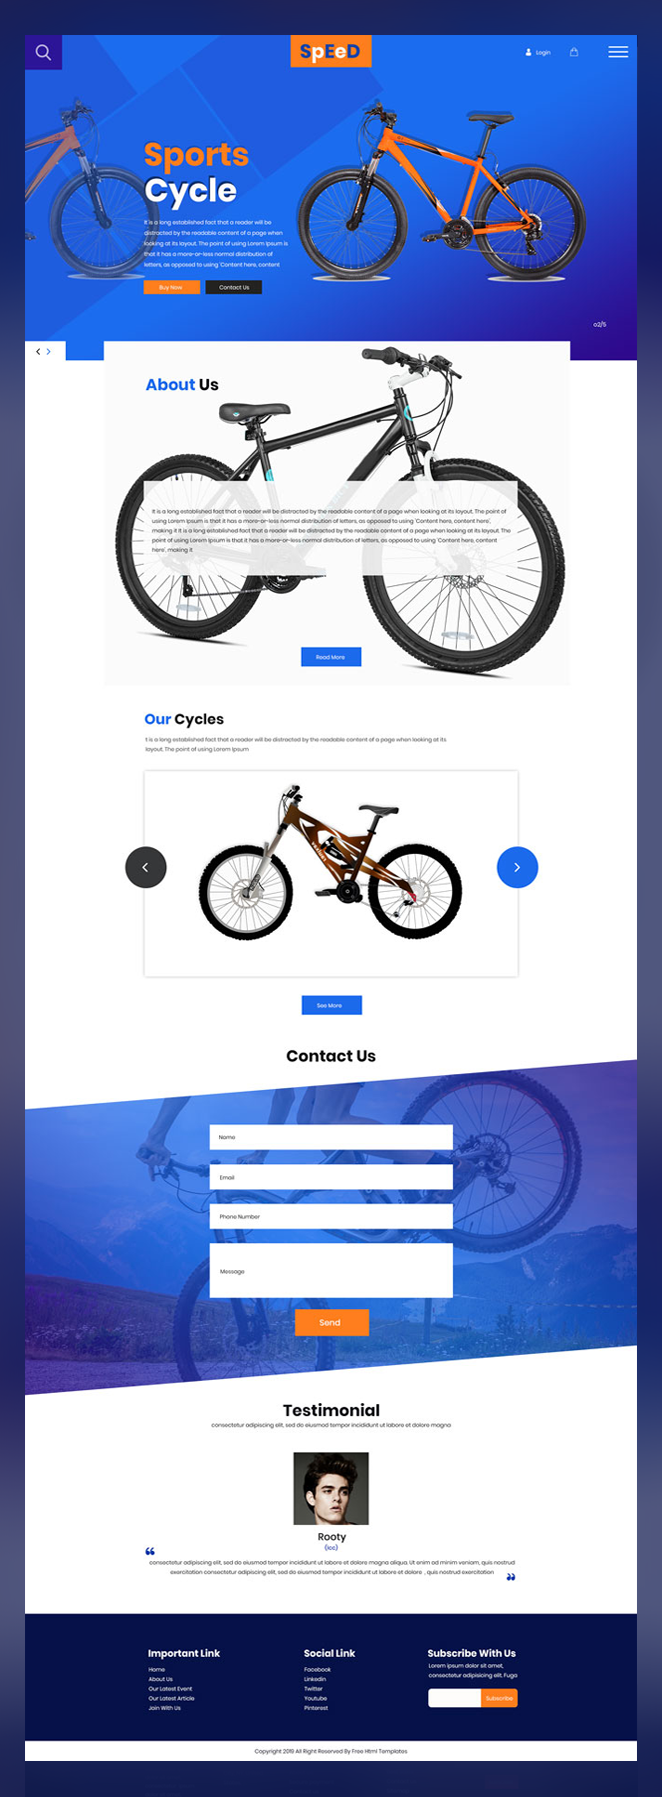 Speed cycle shop psd template